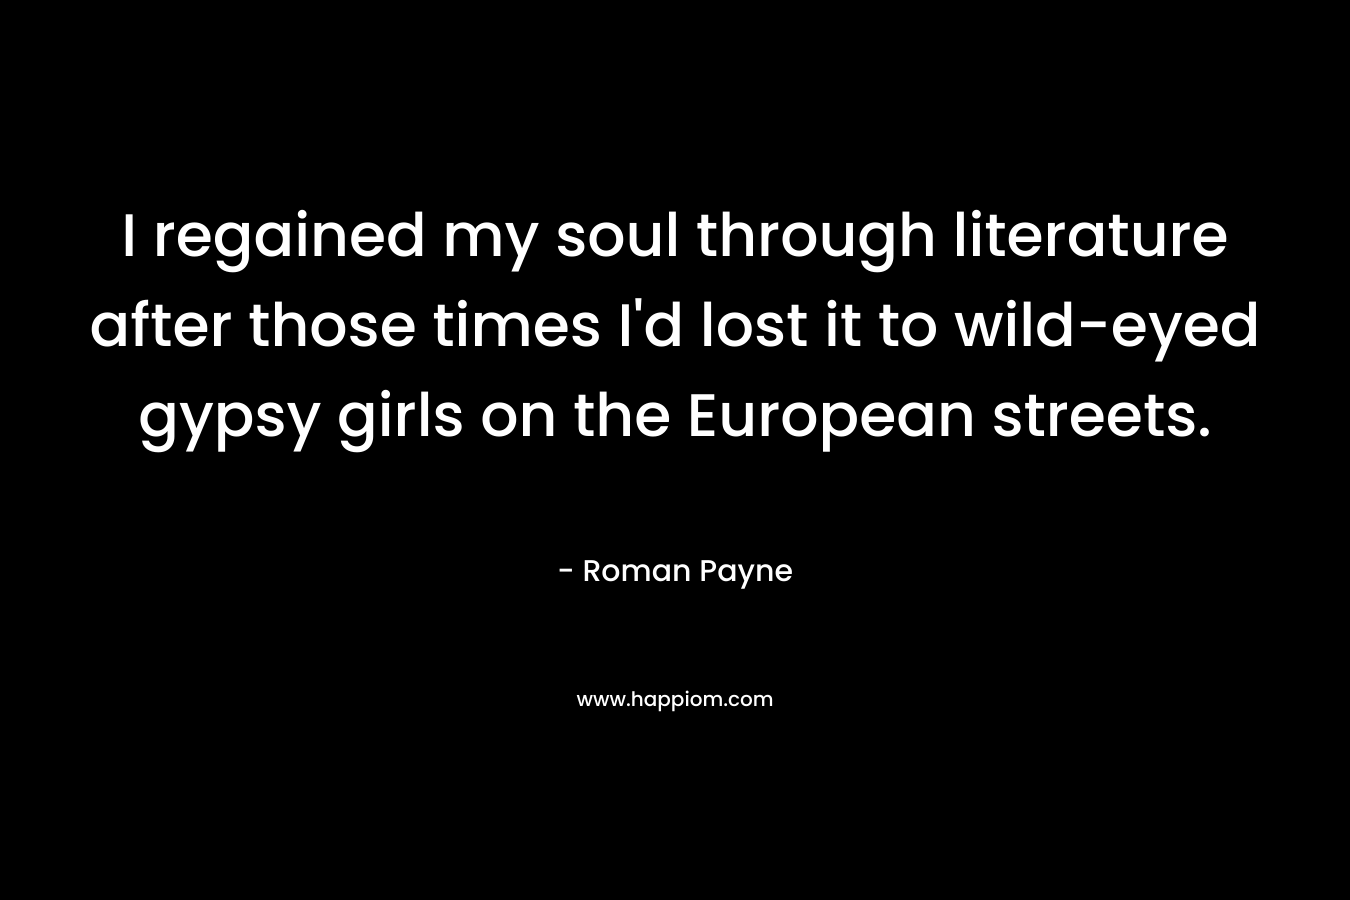 I regained my soul through literature after those times I'd lost it to wild-eyed gypsy girls on the European streets.